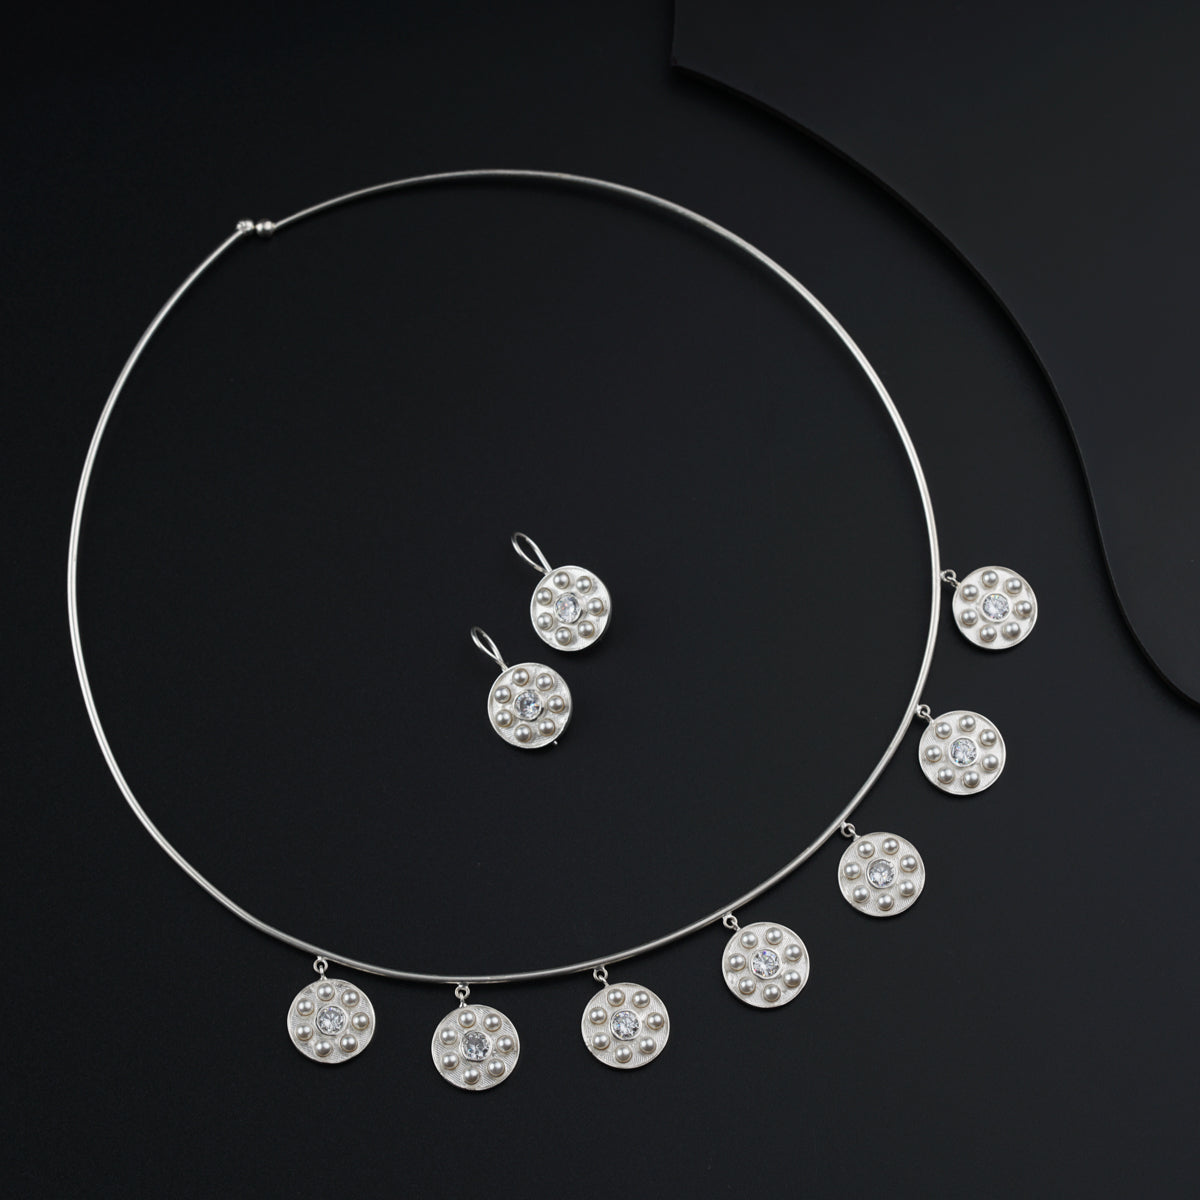 a necklace and earring set on a black surface